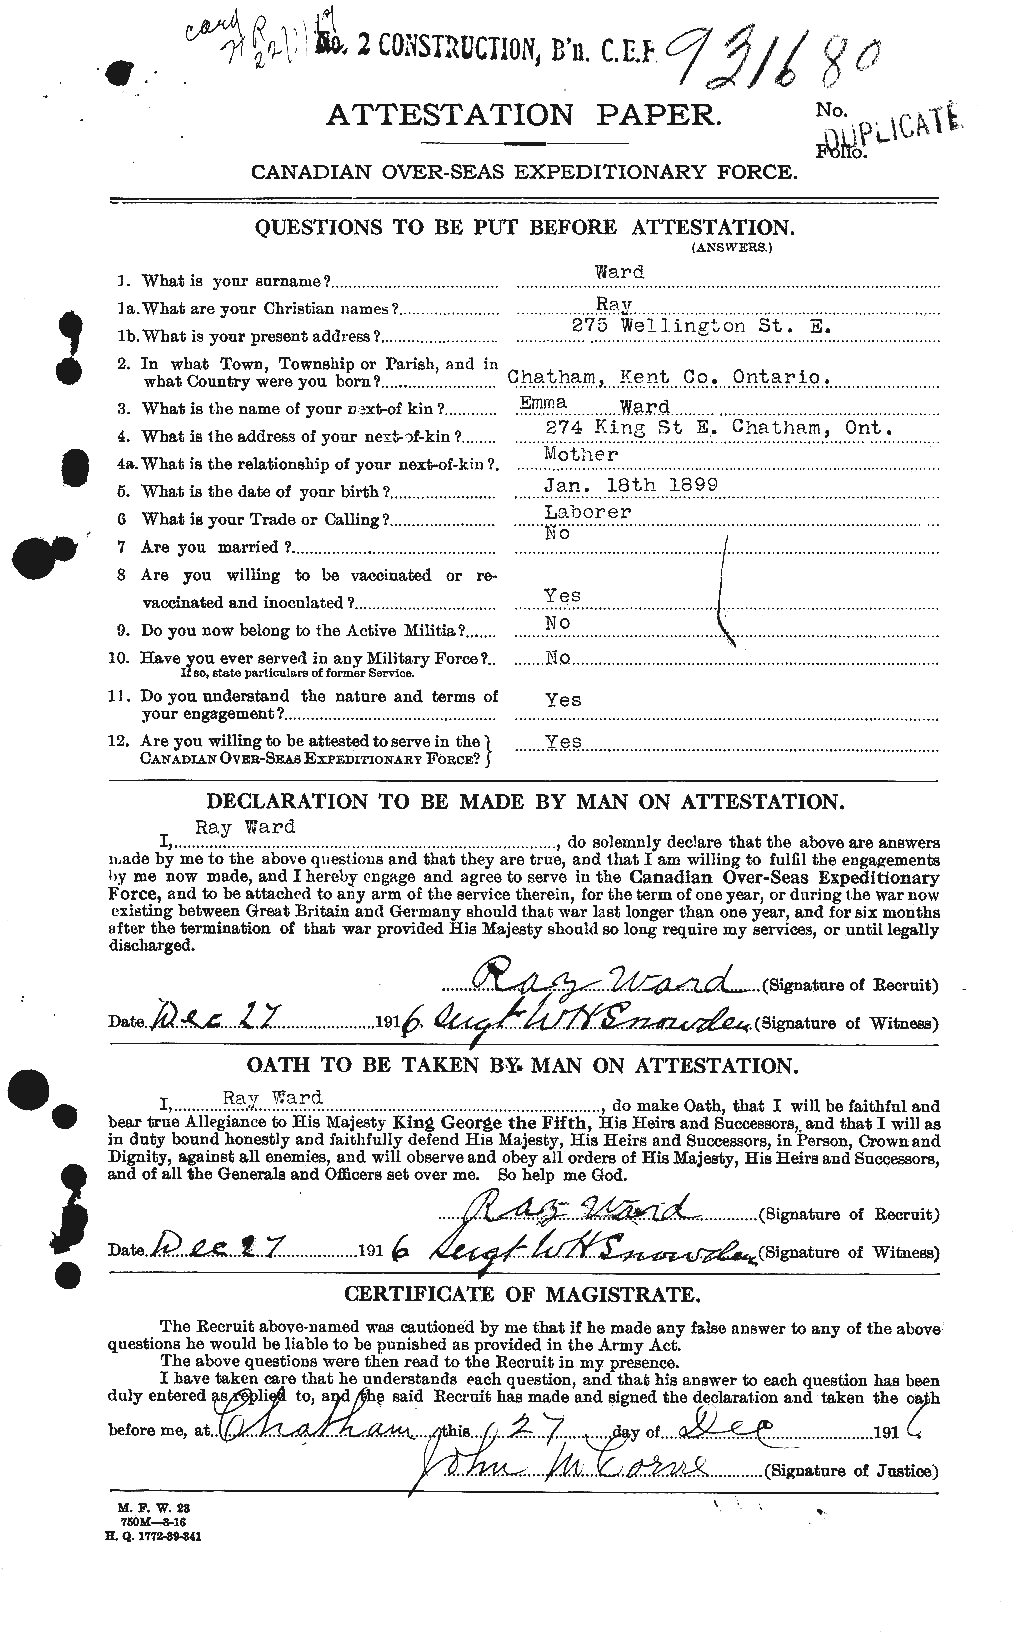 Personnel Records of the First World War - CEF 659637a